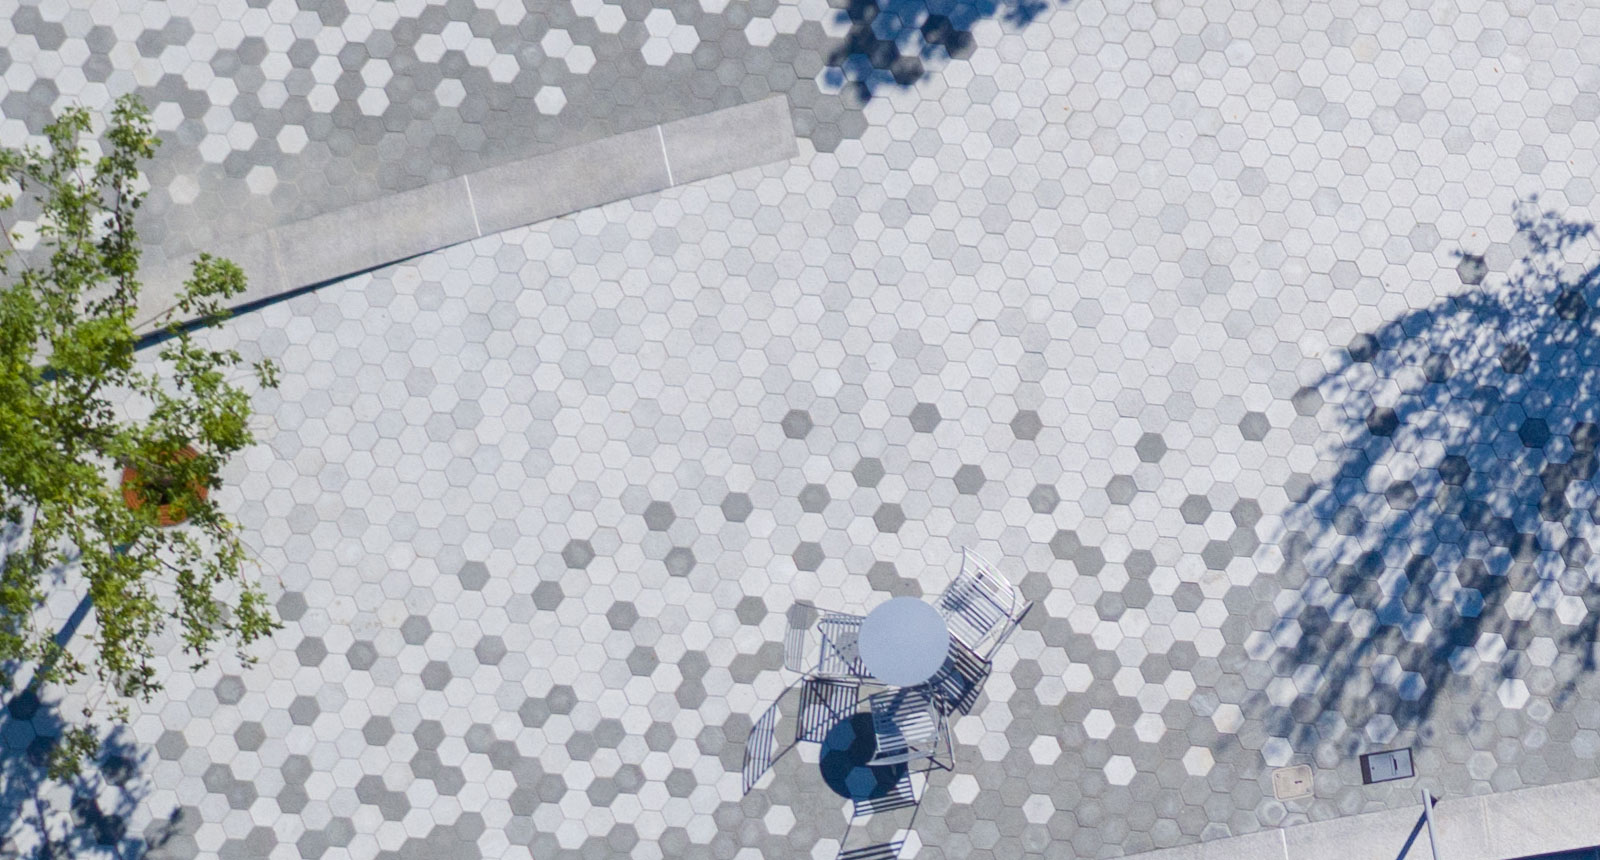 Dark and light gray hexagonal tile from a bird’s-eye view. A tree is in the top left corner.